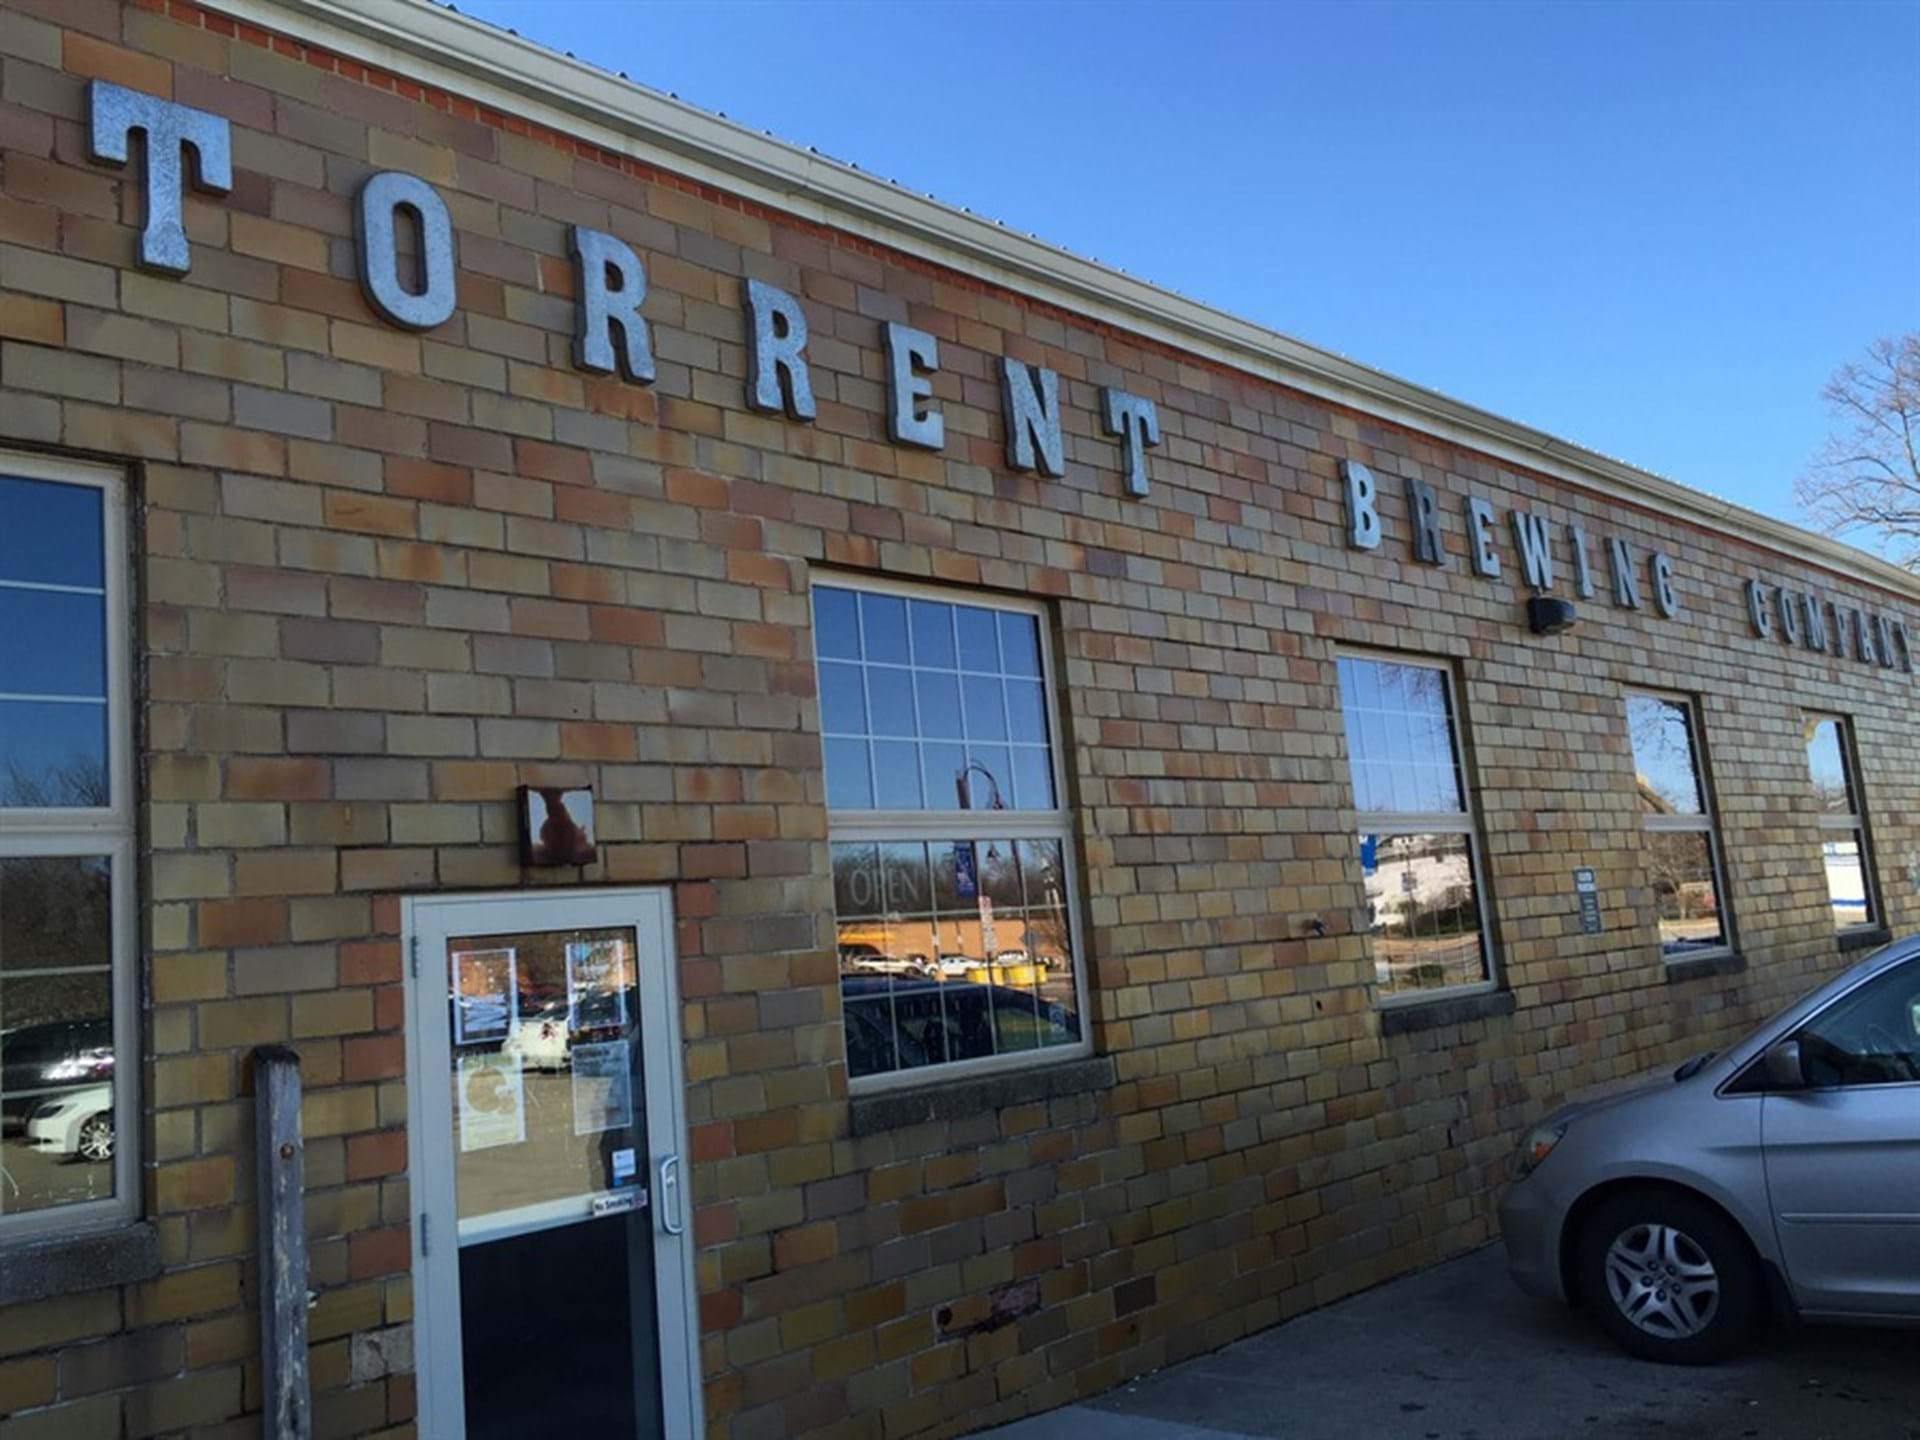 Torrent Brewing Company 